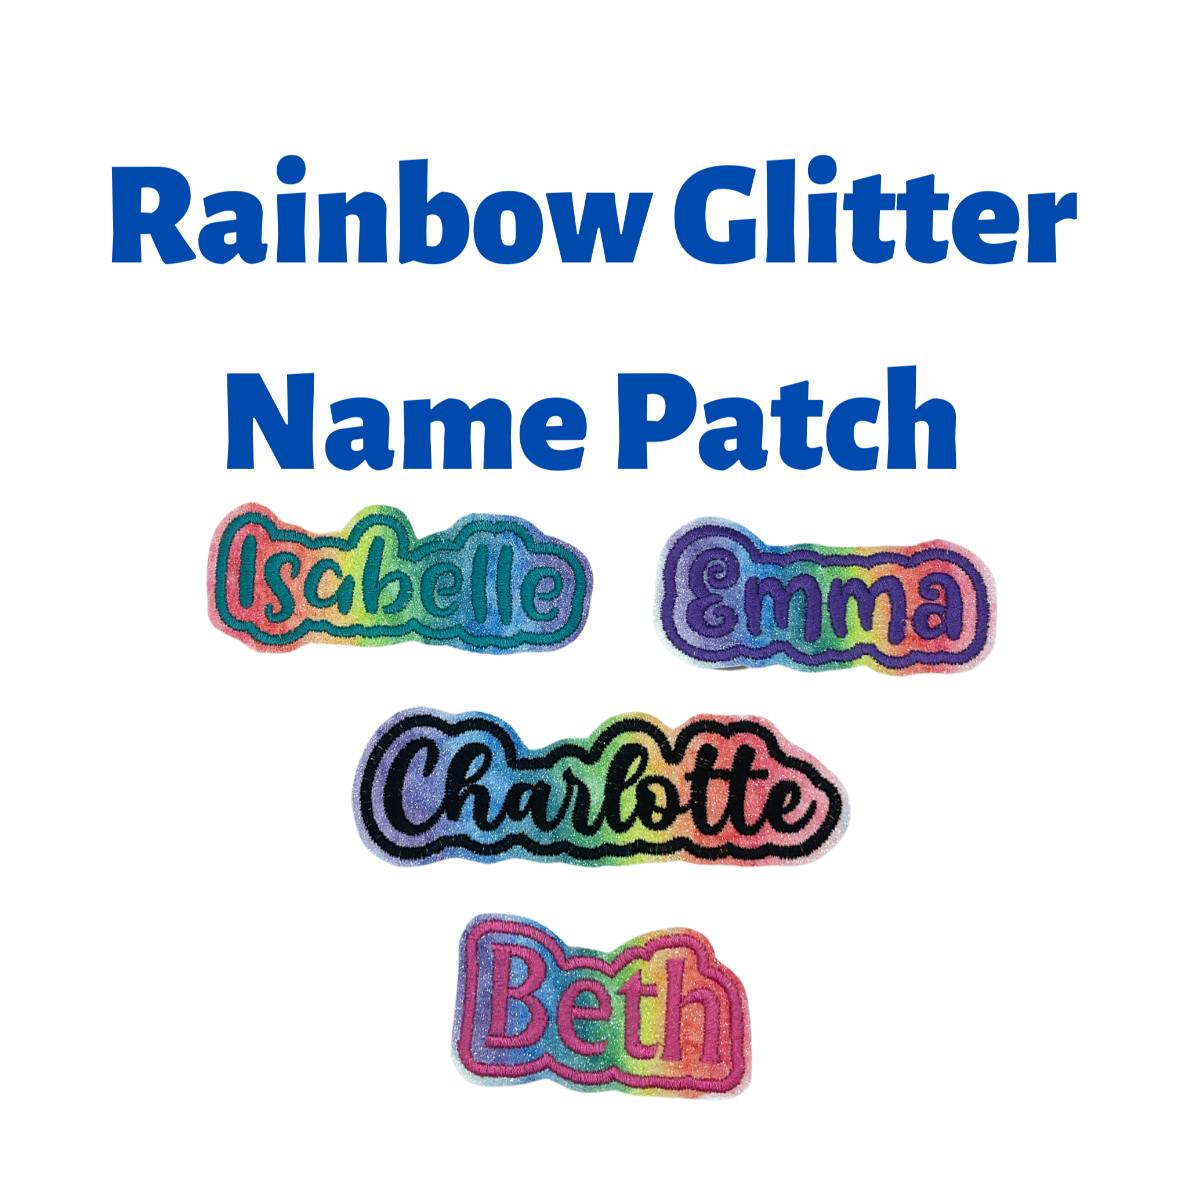 Rainbow Glitter Name Patches